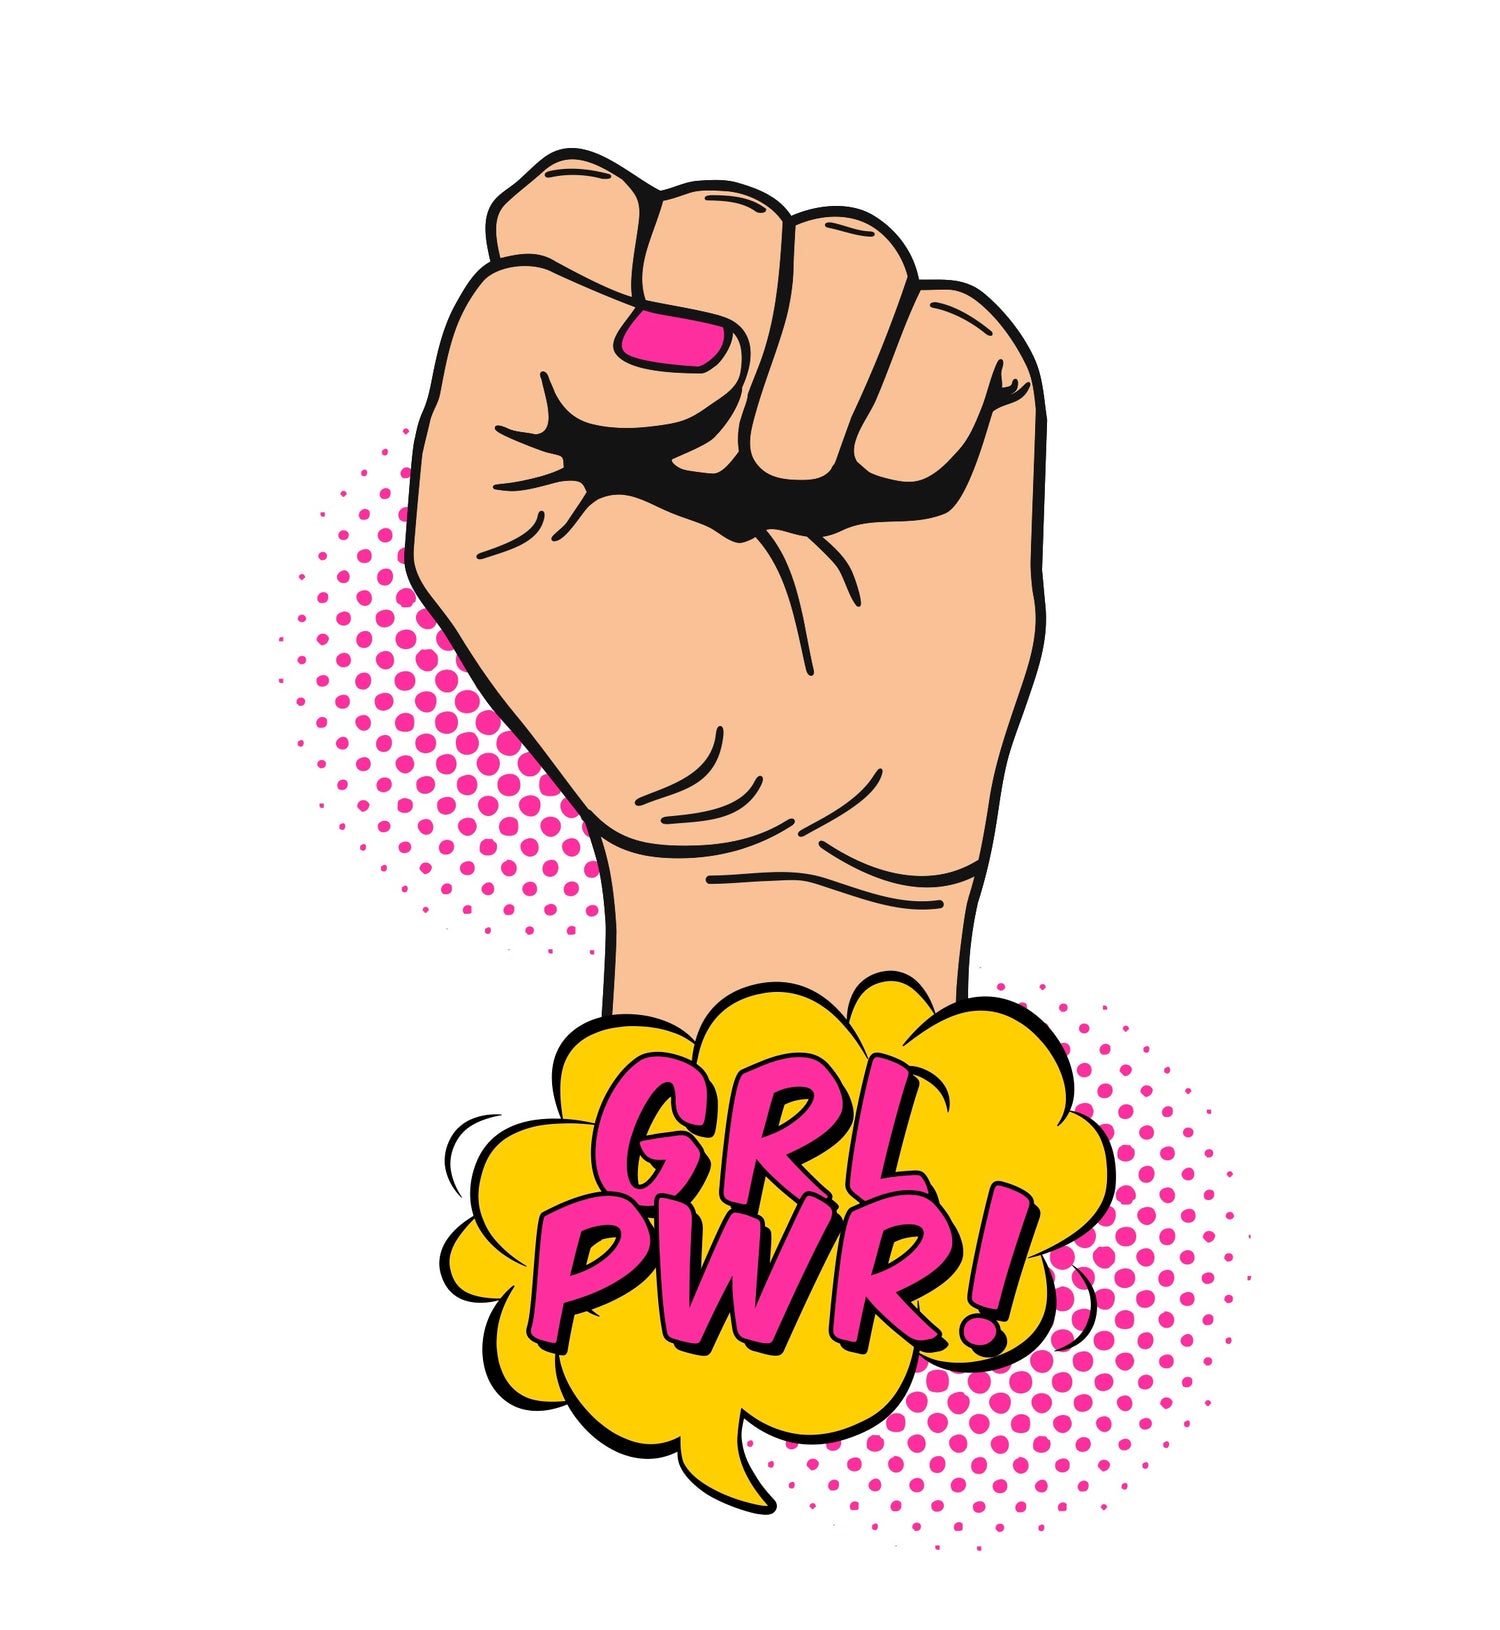 clenched fist with hot pink thumbnail.   A speak bubble at the bottom of the picture there is a yellow speech bubble containing the letters 'GRL PWR!' in hot pink writing.